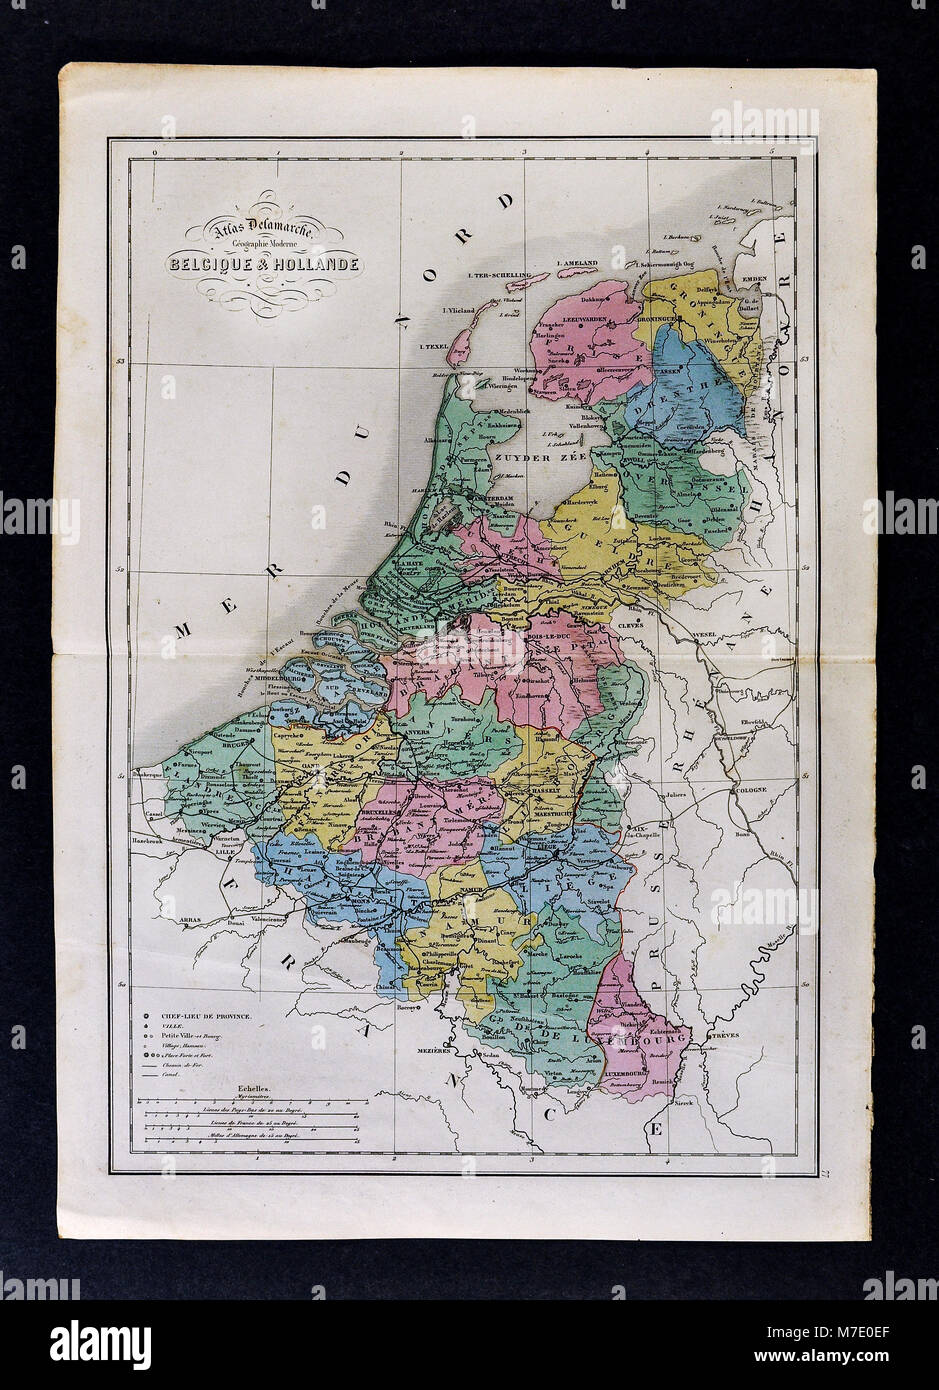 1858 Delamarche Map Europe Map of Netherlands including Belgium,  Holland, Luxembourg, Amsterdam, Brussels Stock Photo